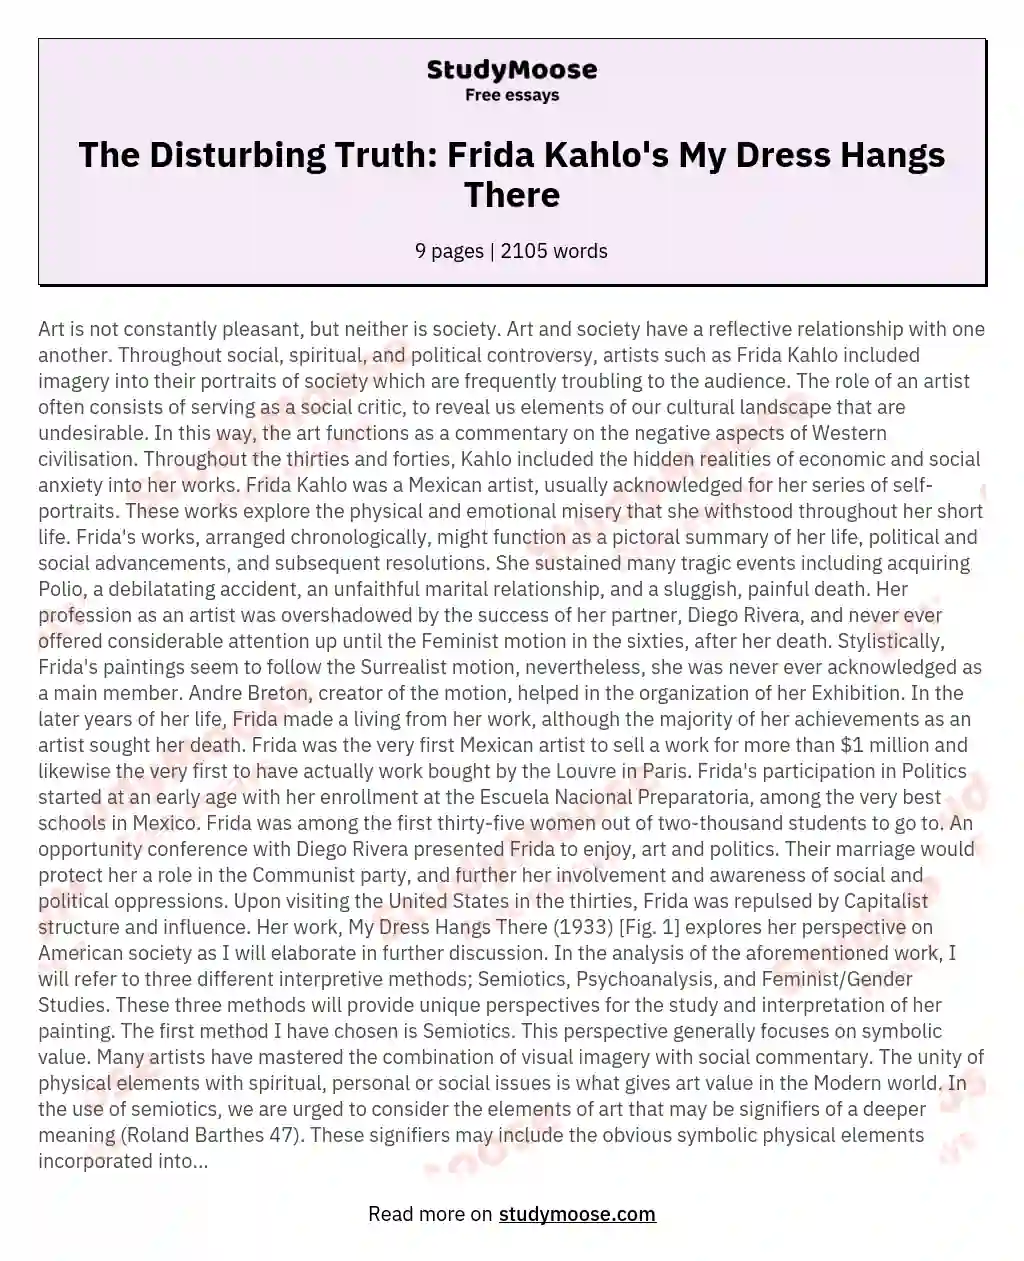 The Disturbing Truth: Frida Kahlo's My Dress Hangs There essay